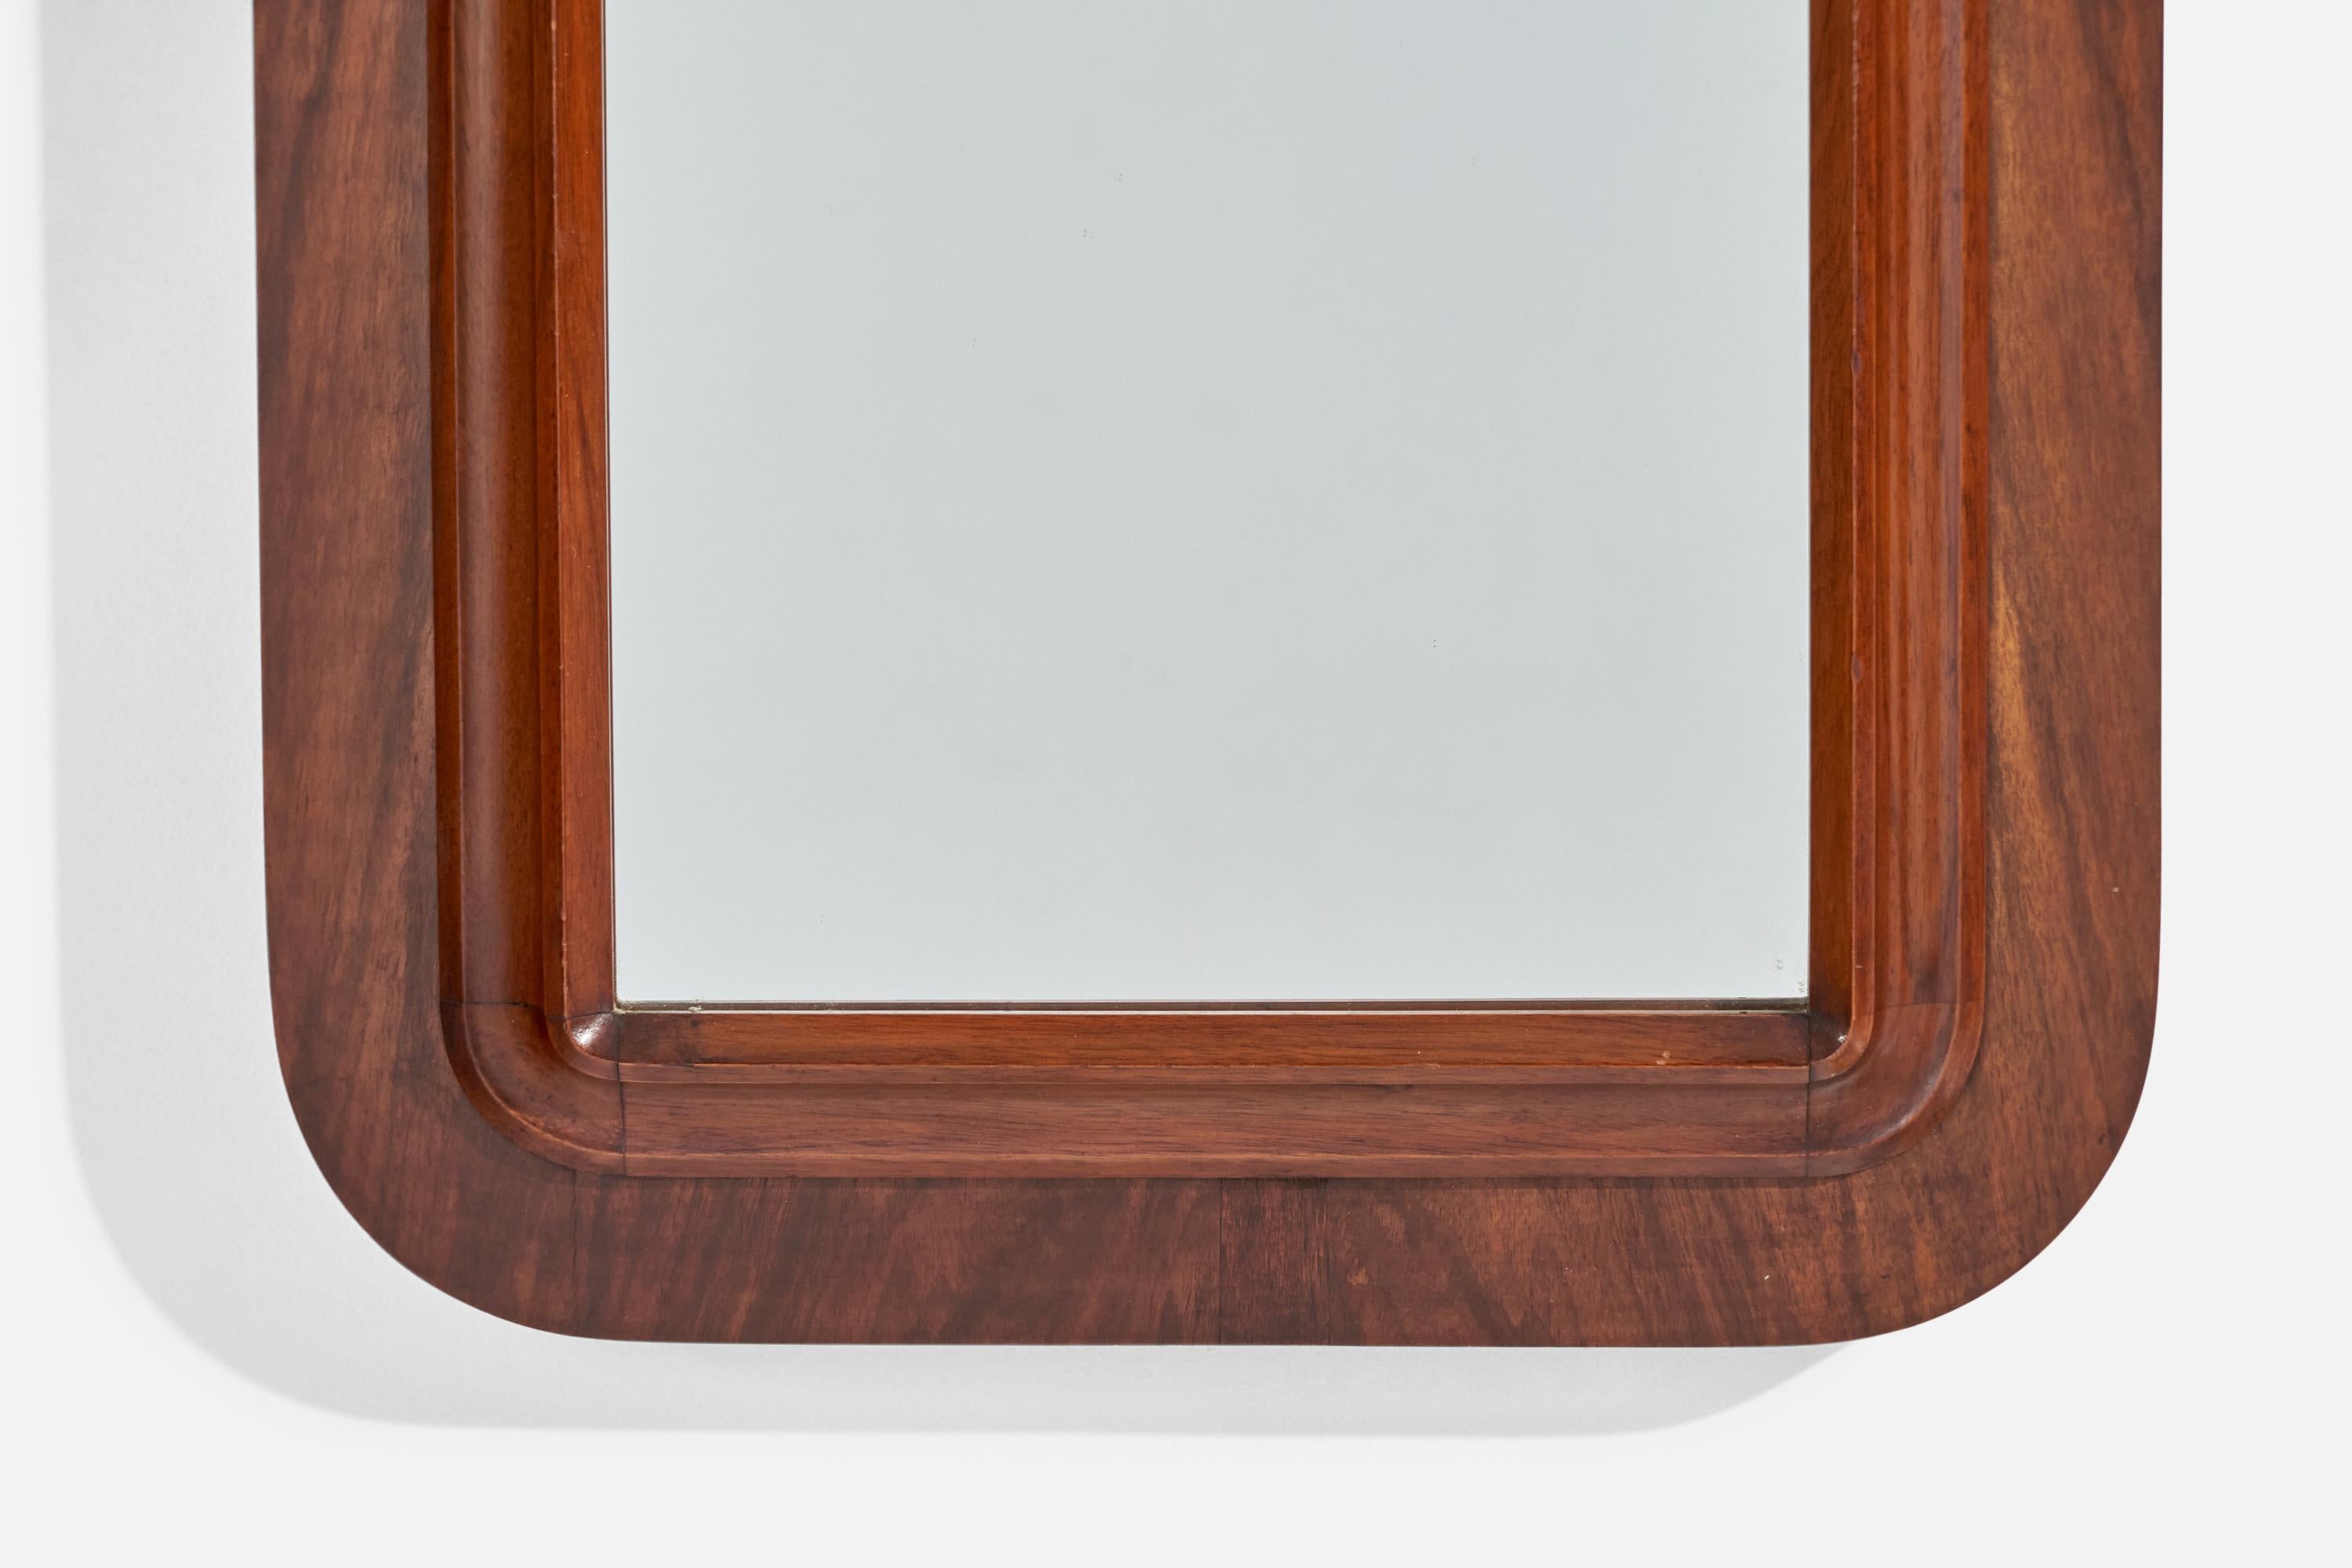 Italian Designer, Wall Mirror, Dark-Stained Wood, Italy, 1940s For Sale 2